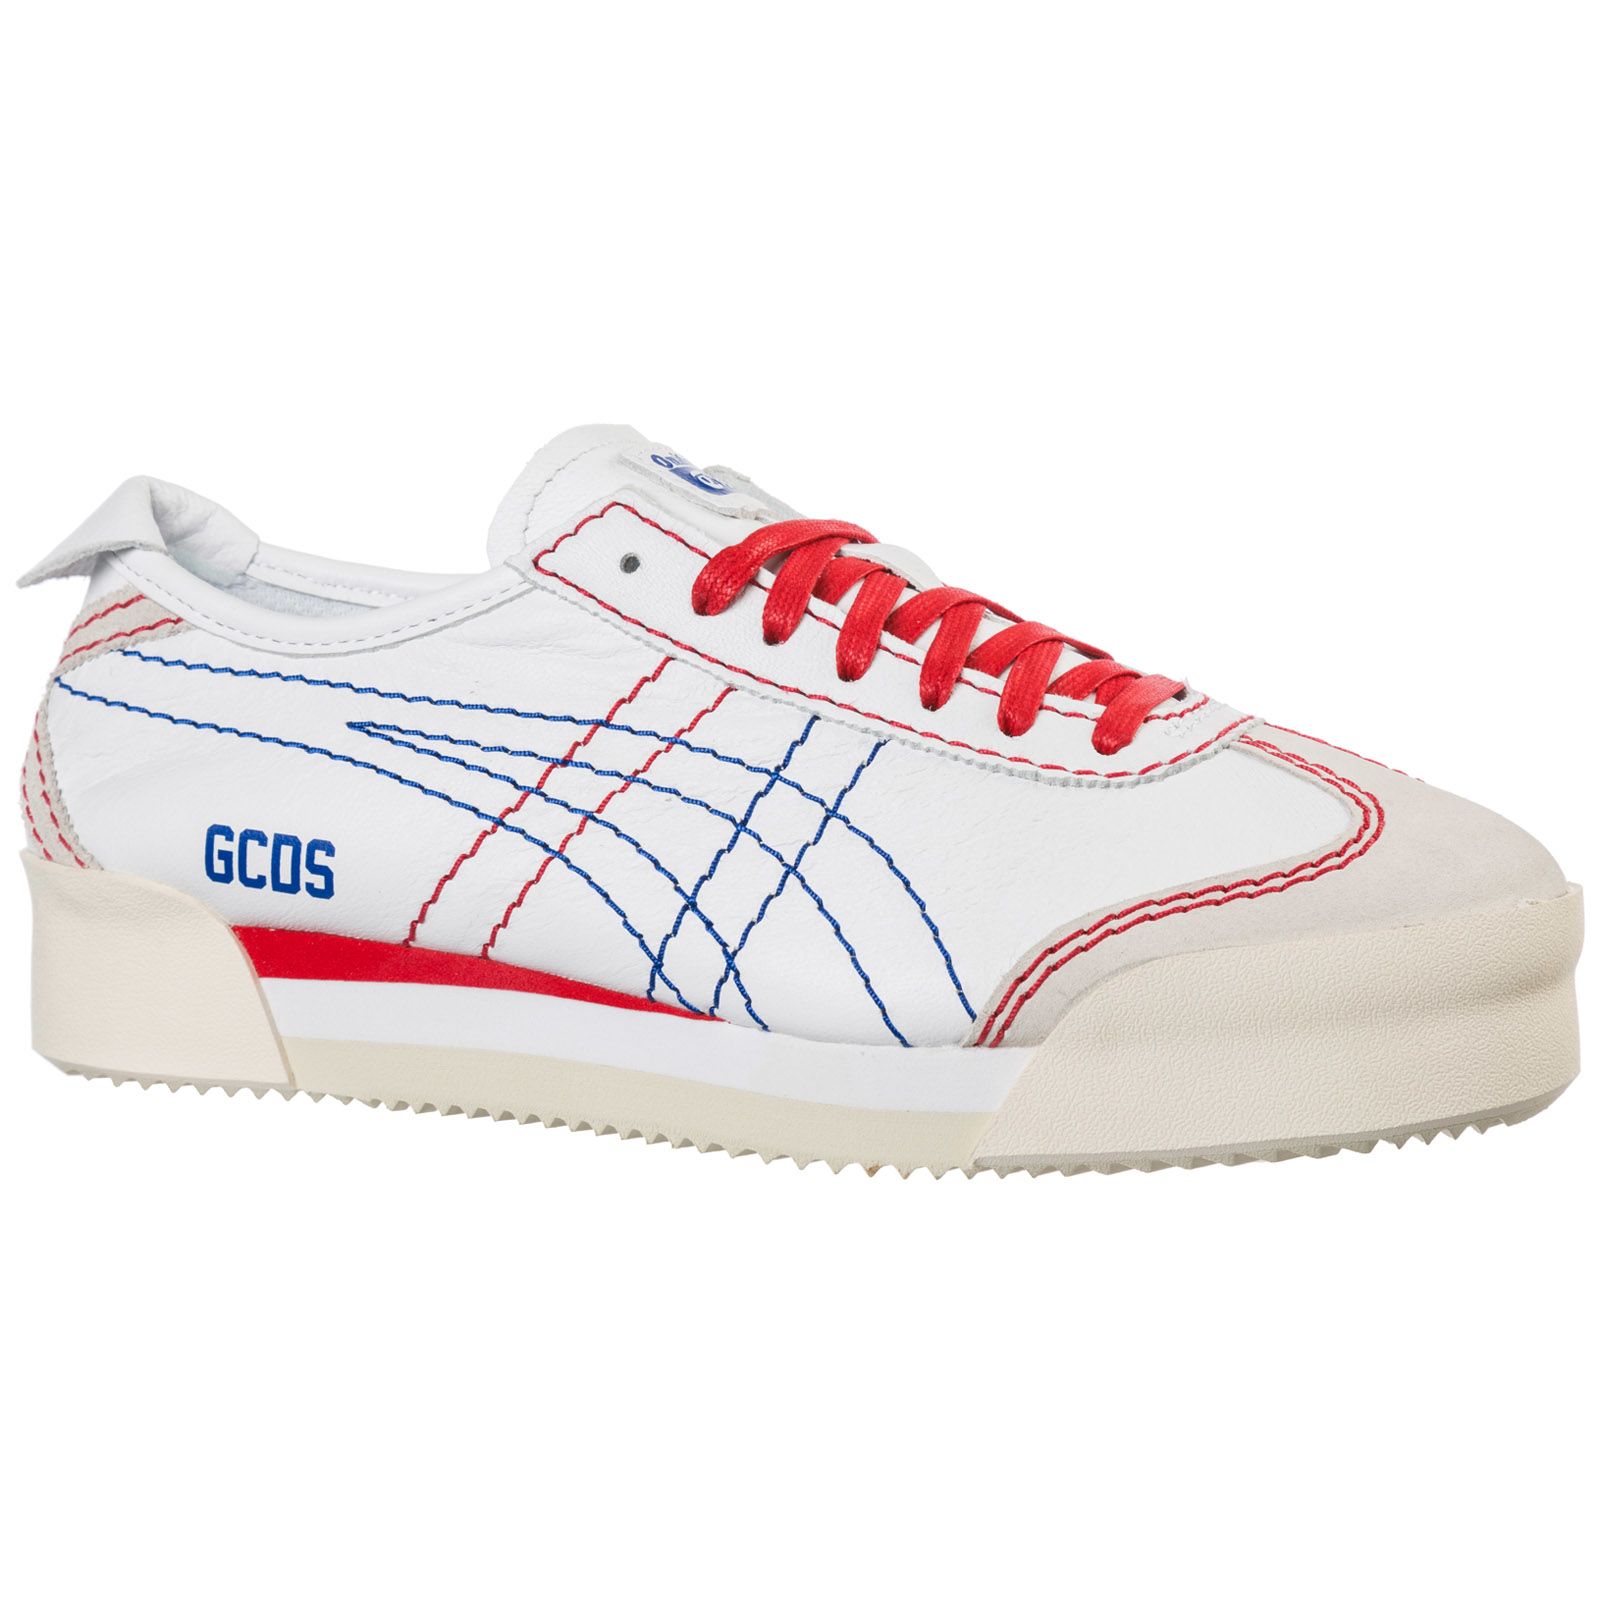 GCDS GCDS Shoes Leather Trainers Sneakers Onitsuka Tiger Mexico ...